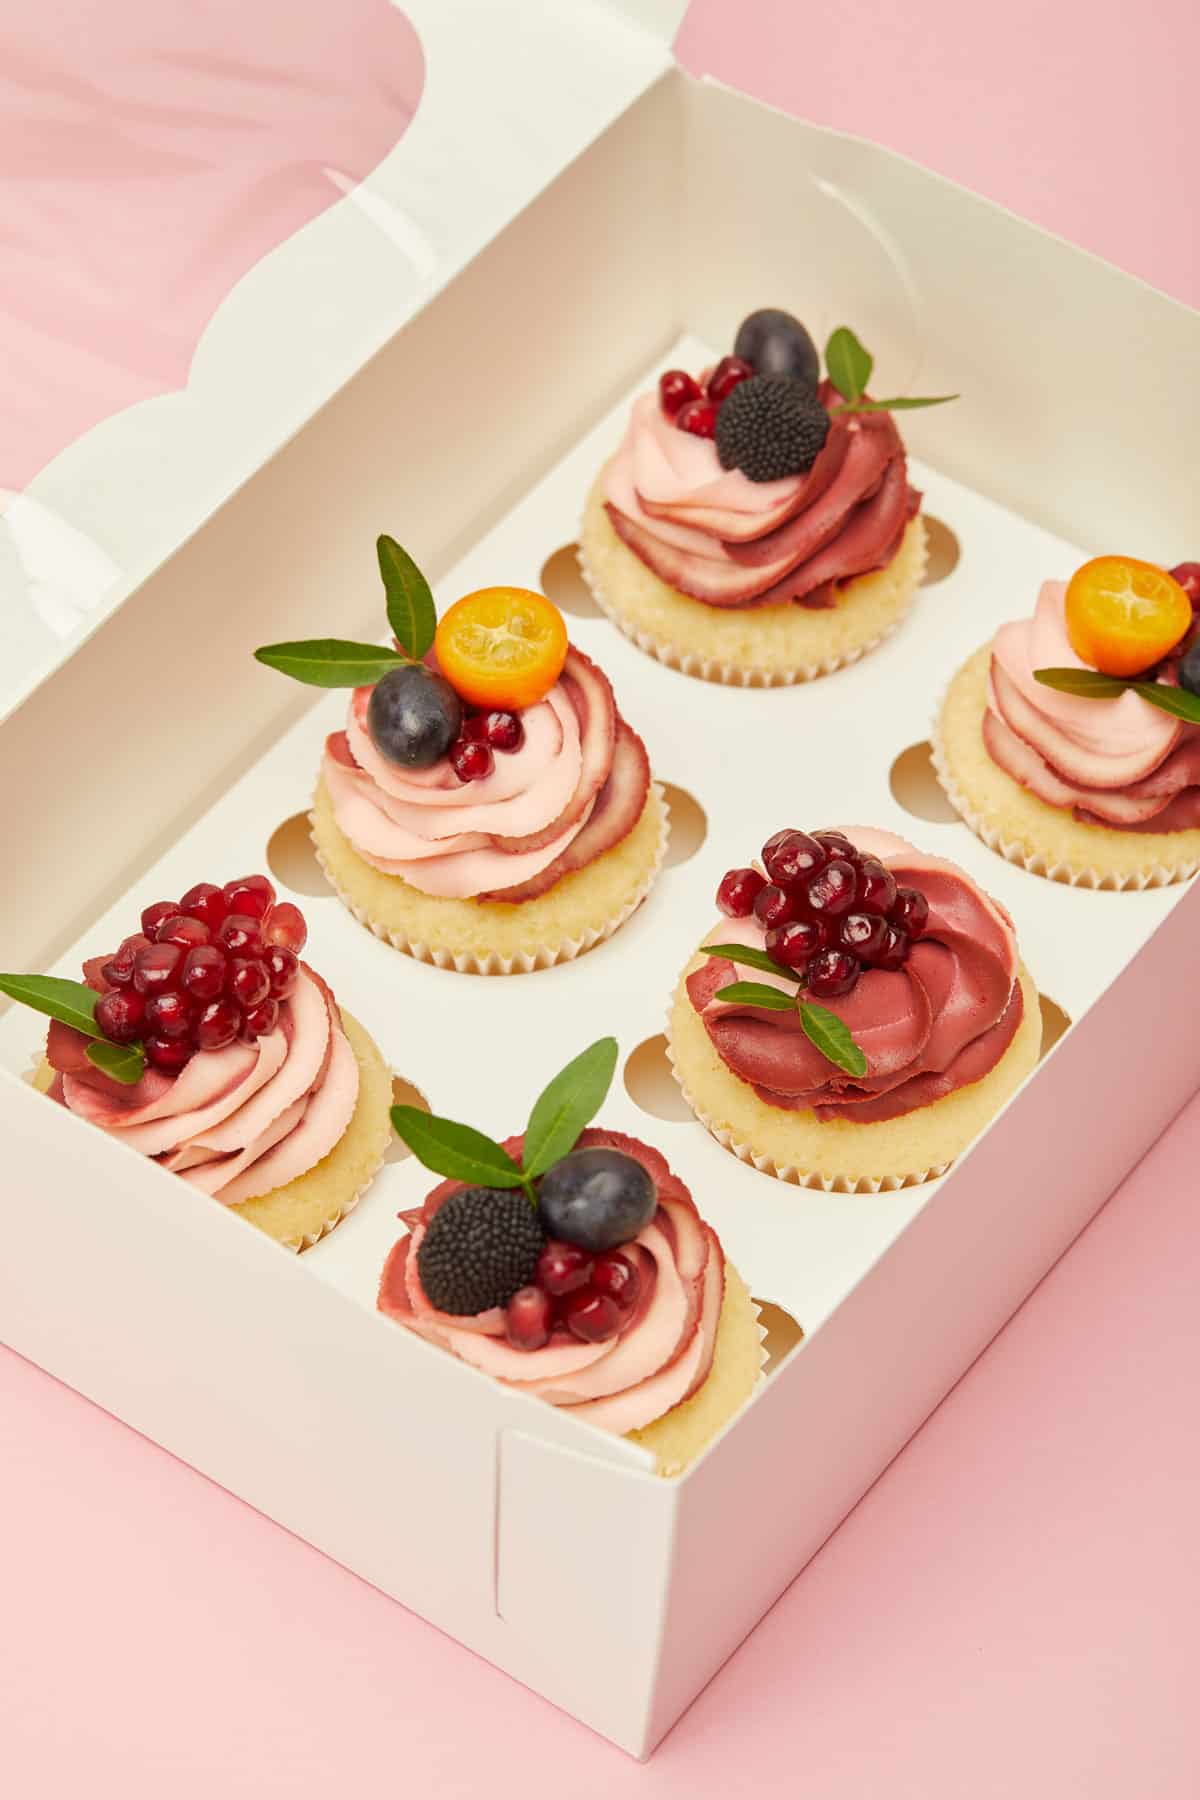 Cupcakes decorated with frosting and fruit in a cupcake box against a pink background. 